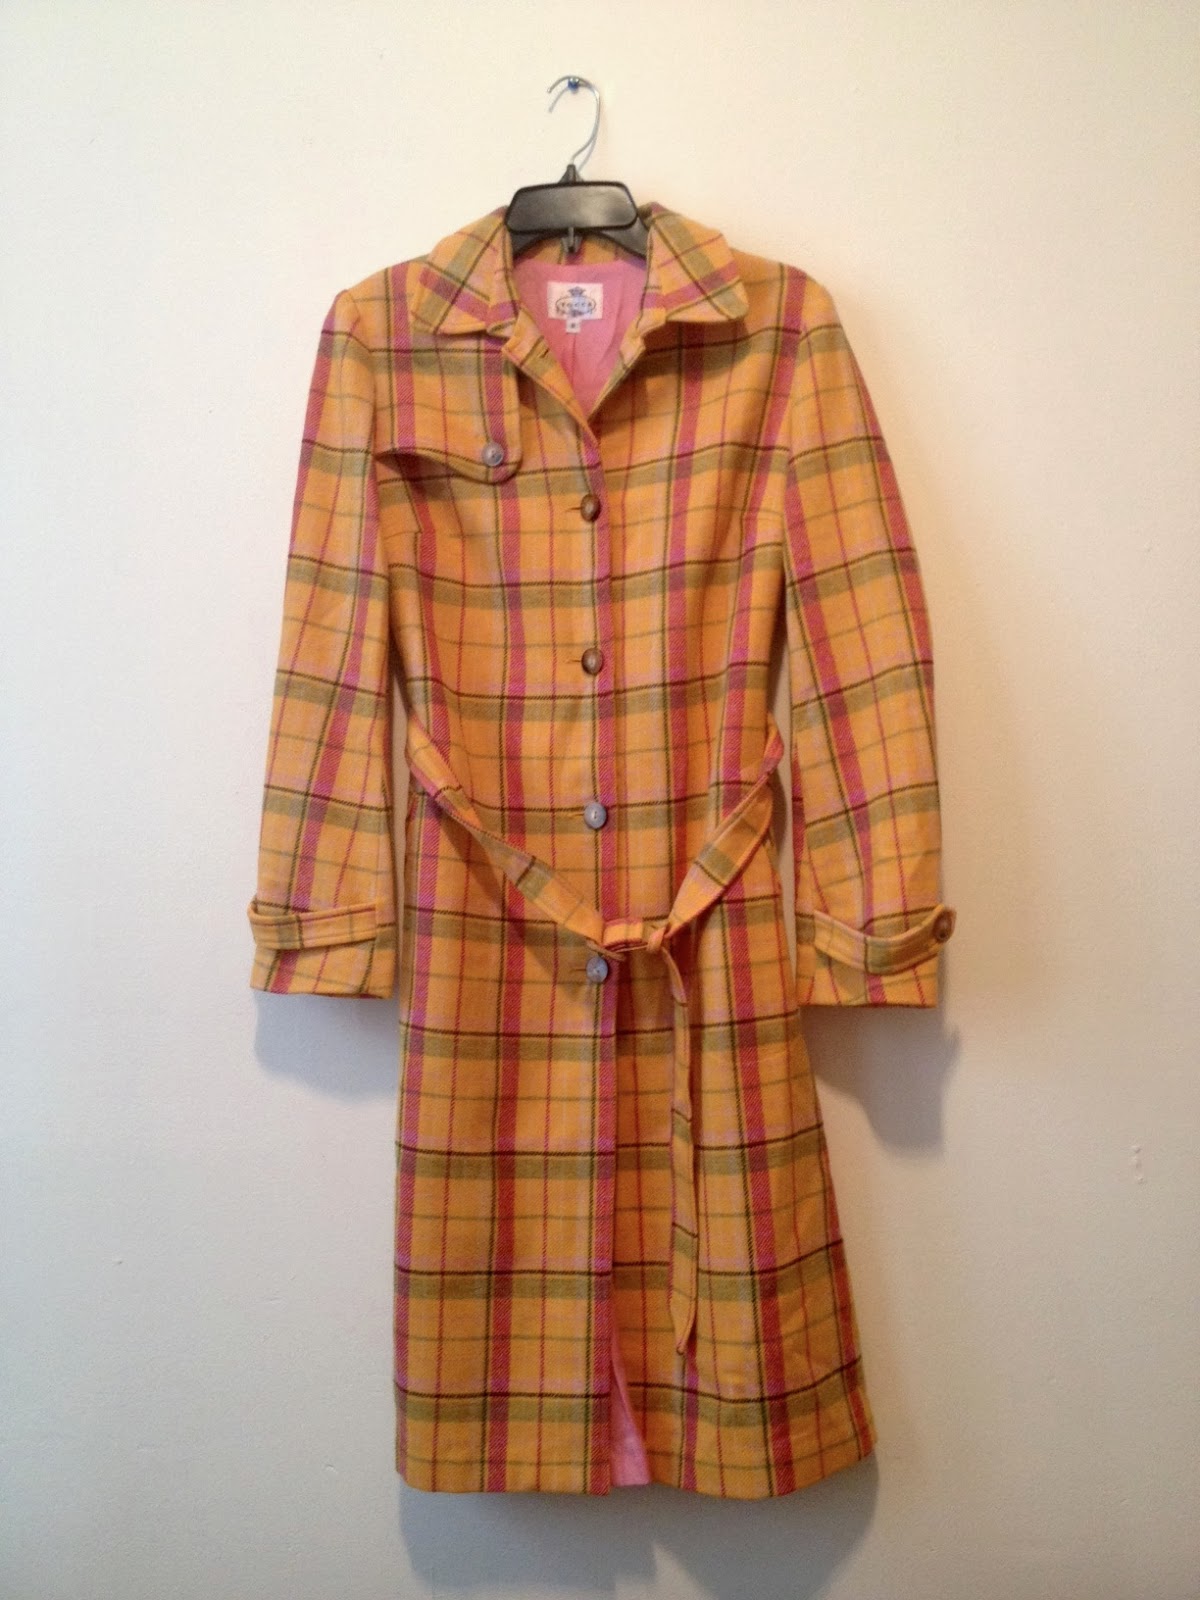 laws of general economy: Tocca Yellow Plaid Coat, Size 8